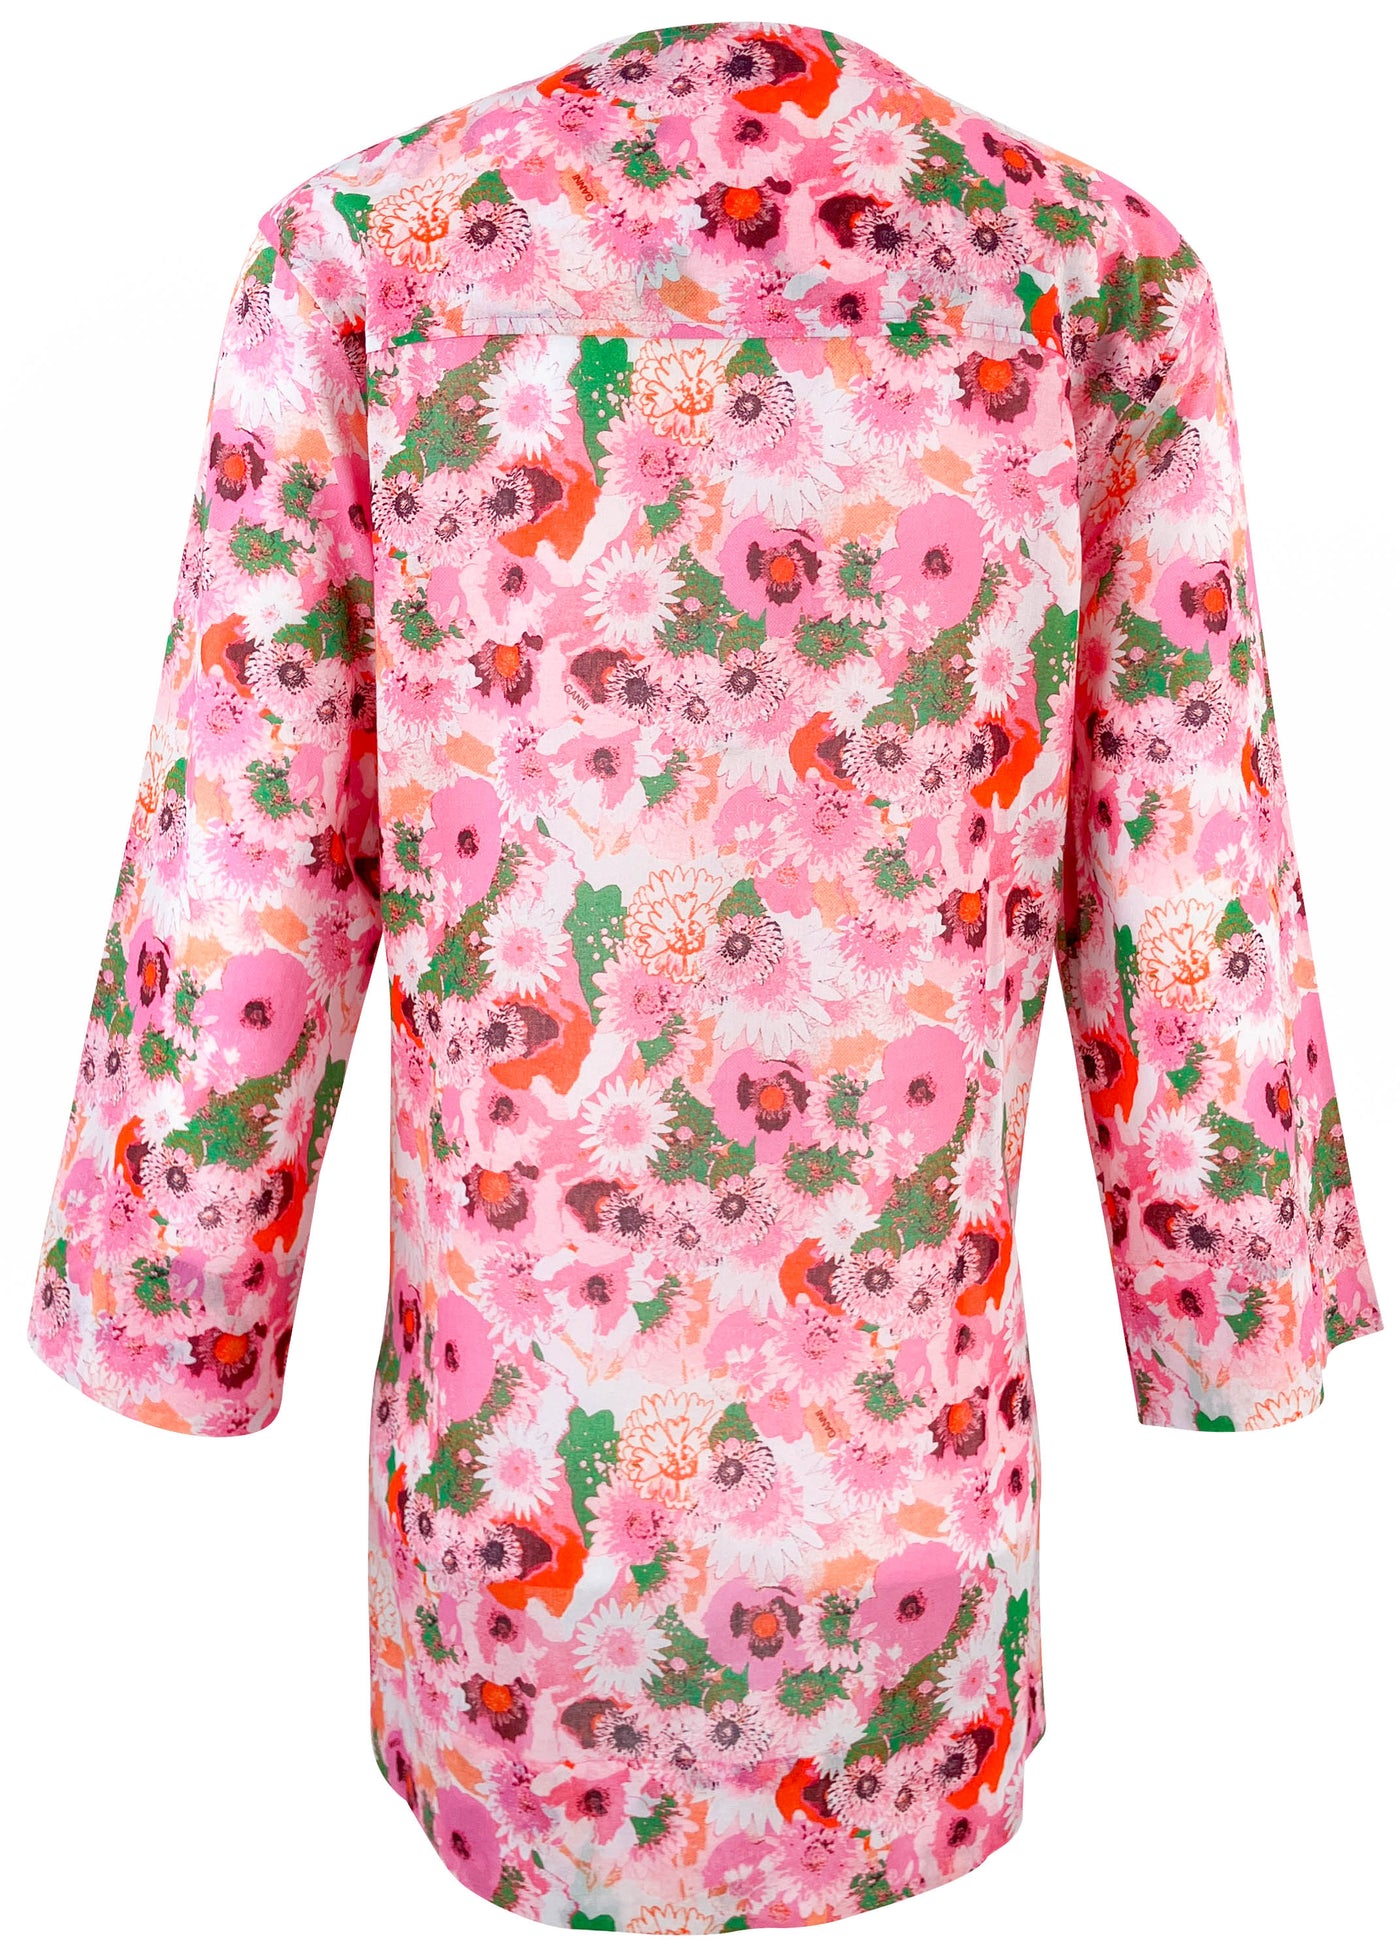 Ganni Open Front Blouse in Pink Floral - Discounts on Ganni at UAL